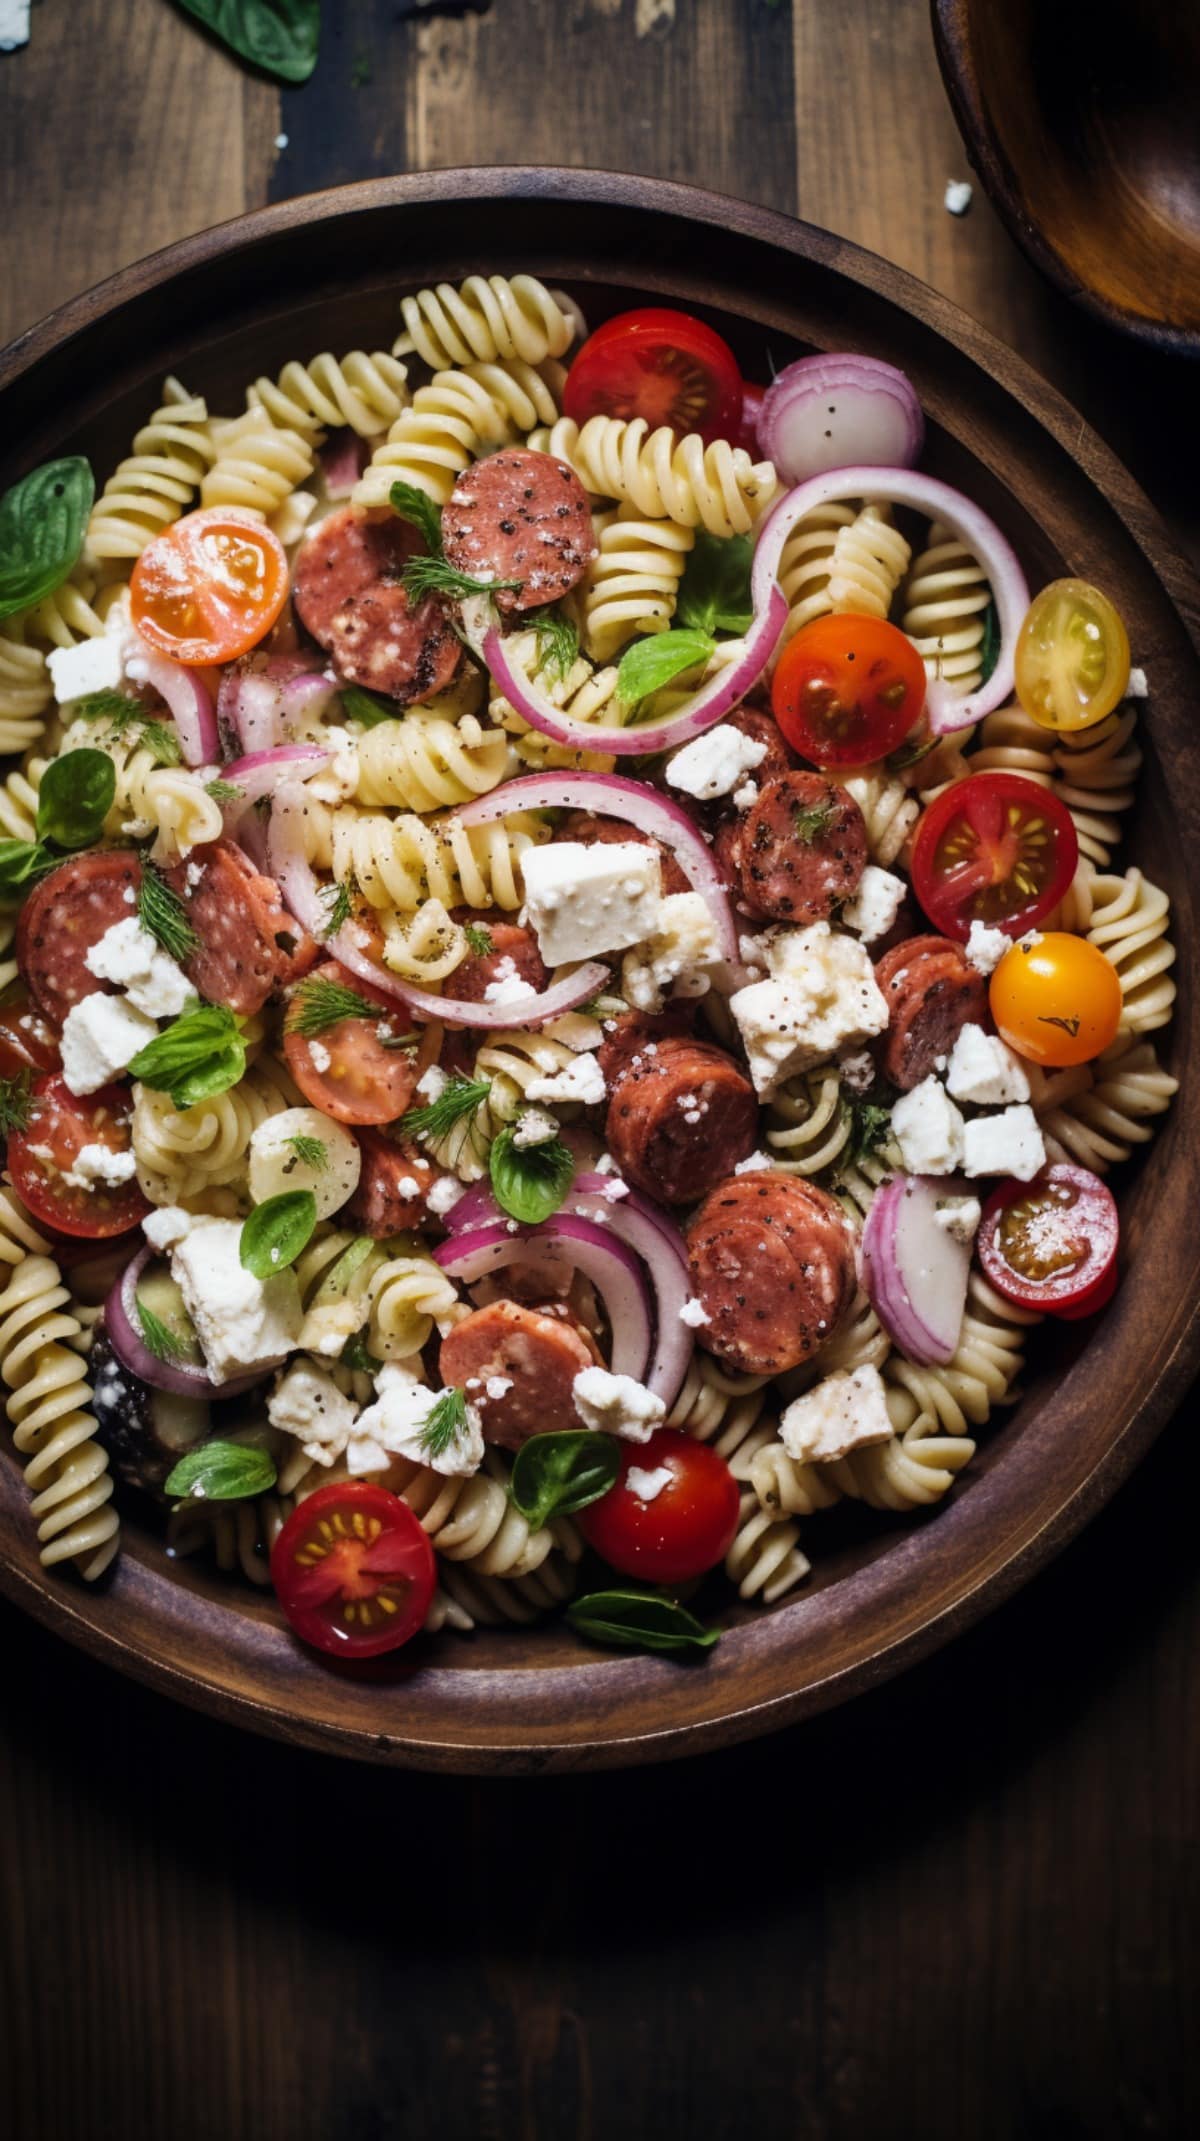 Antipasto Pasta Salad with cherry tomatoes, feta, olives, and salami, garnished with dill and basil leaves served on a brown bowl